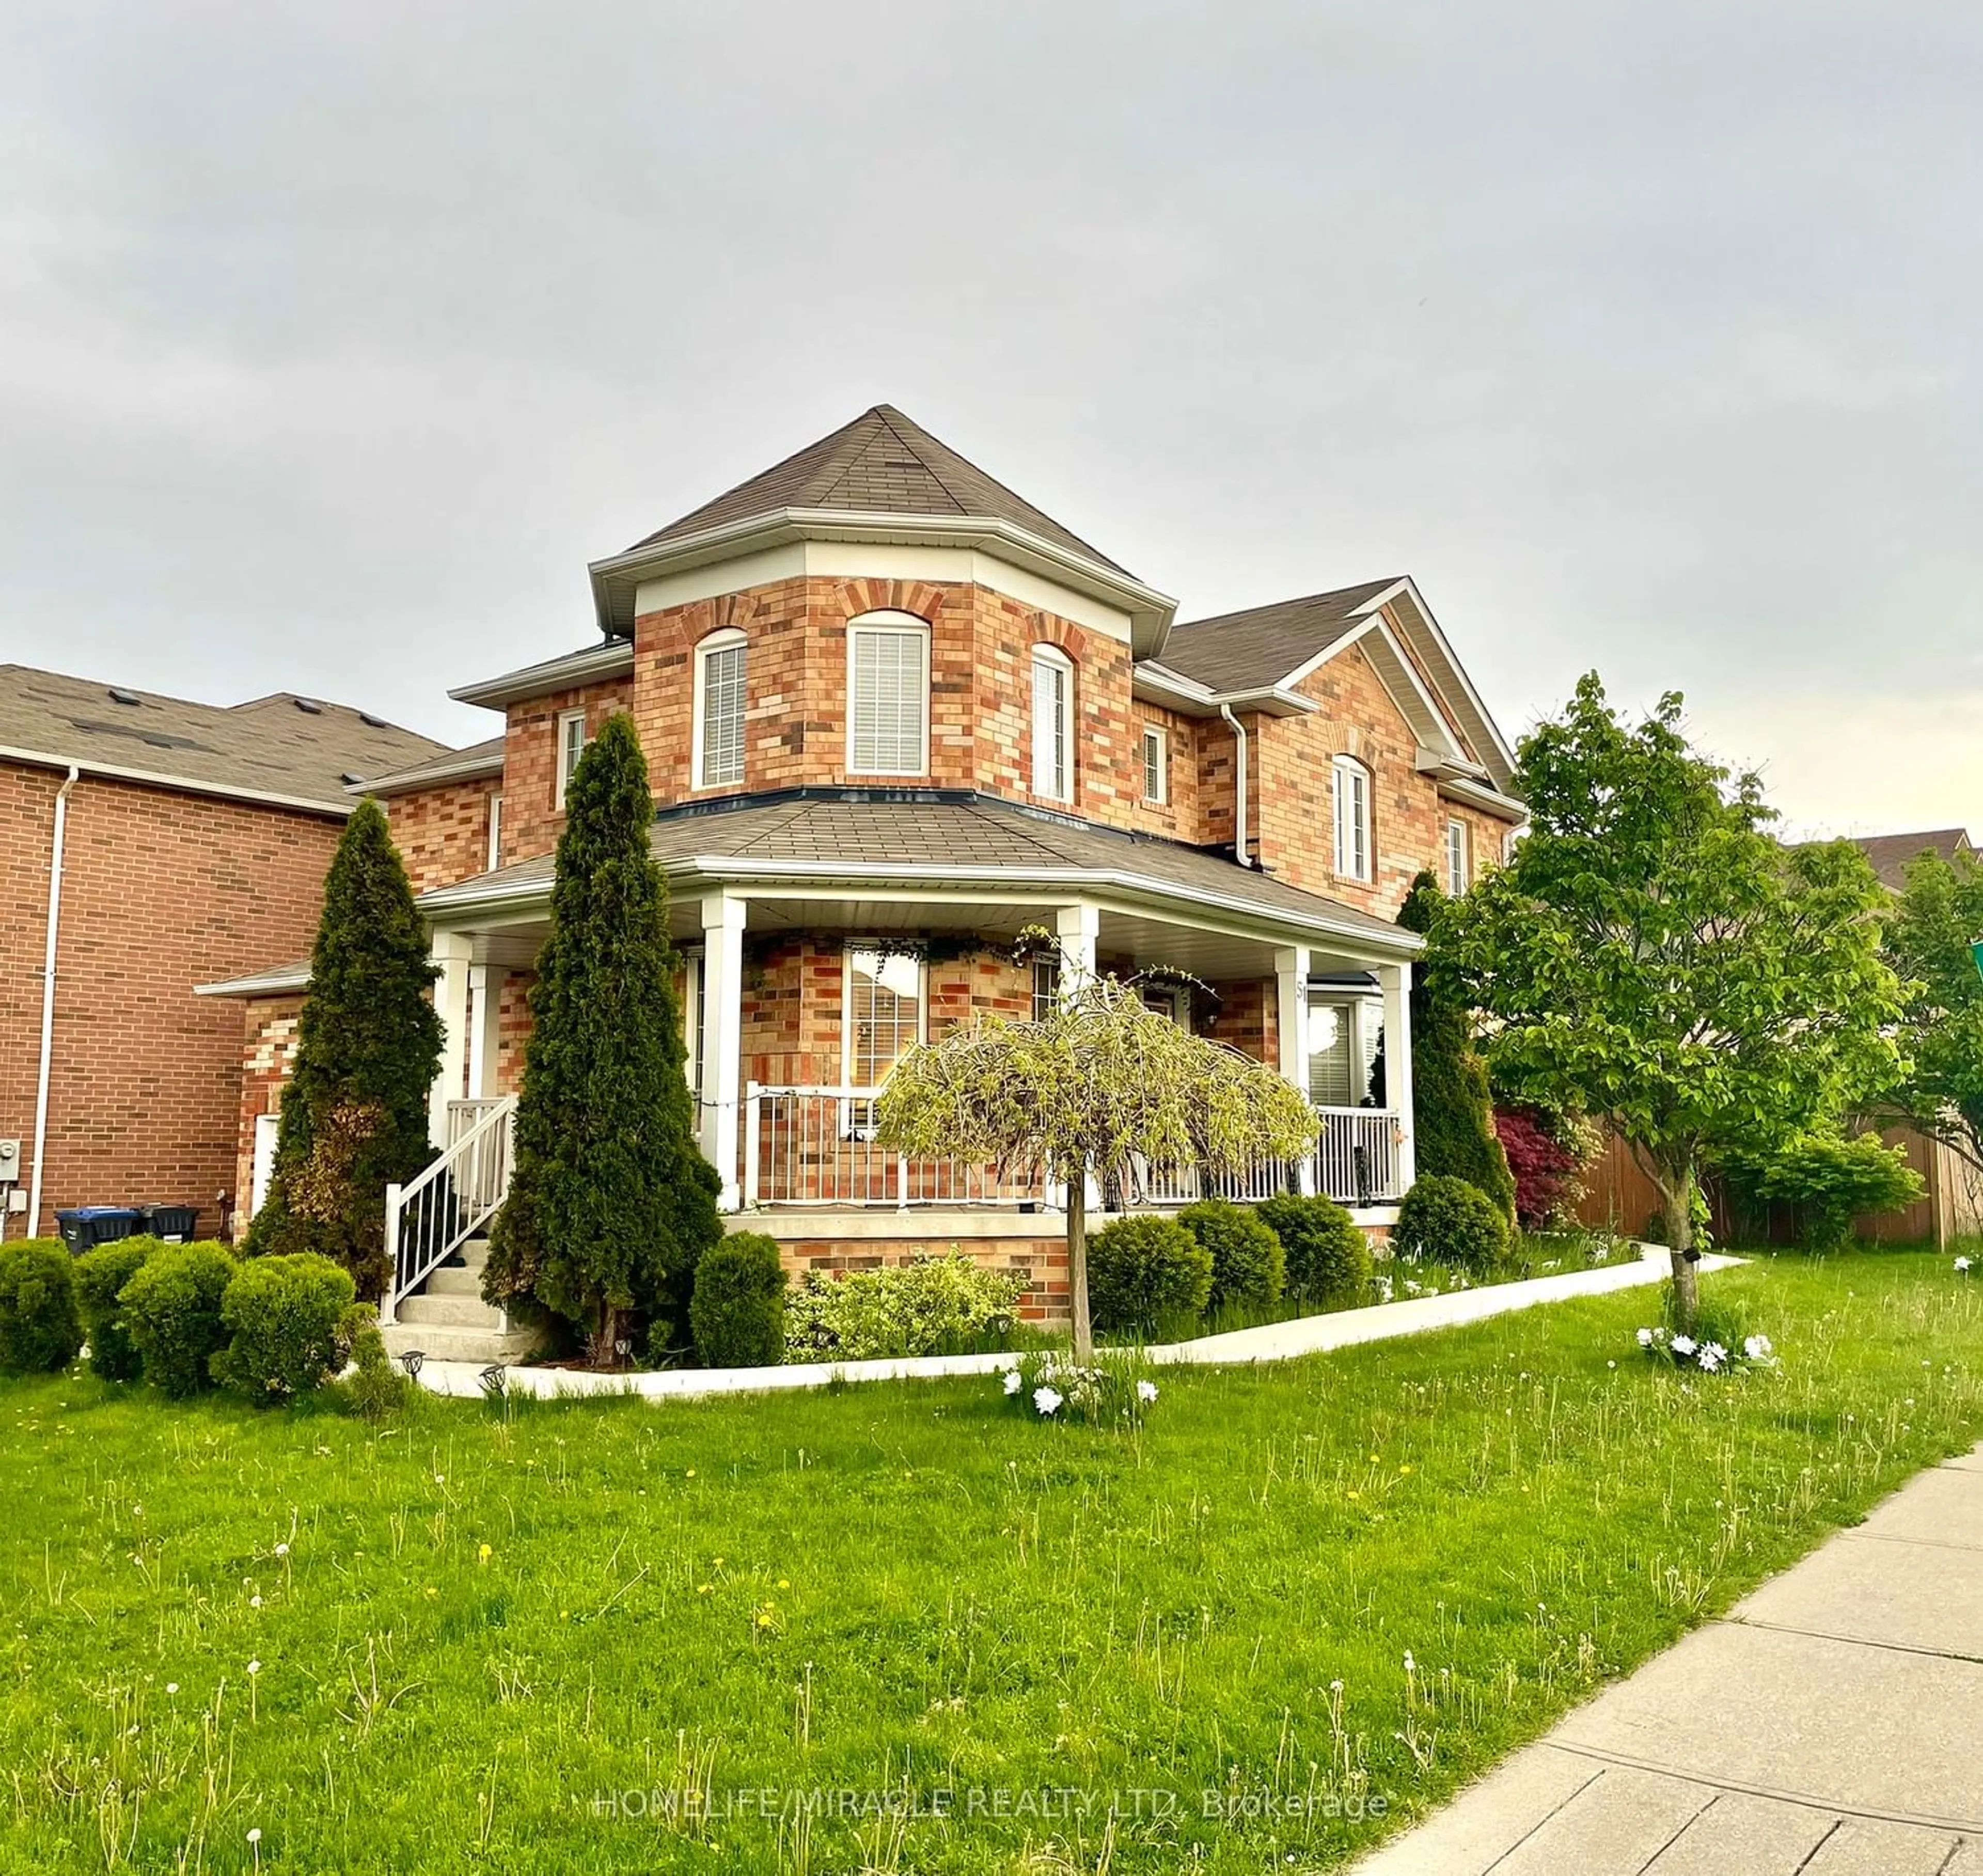 Home with brick exterior material for 51 Leagate St, Brampton Ontario L7A 3J1